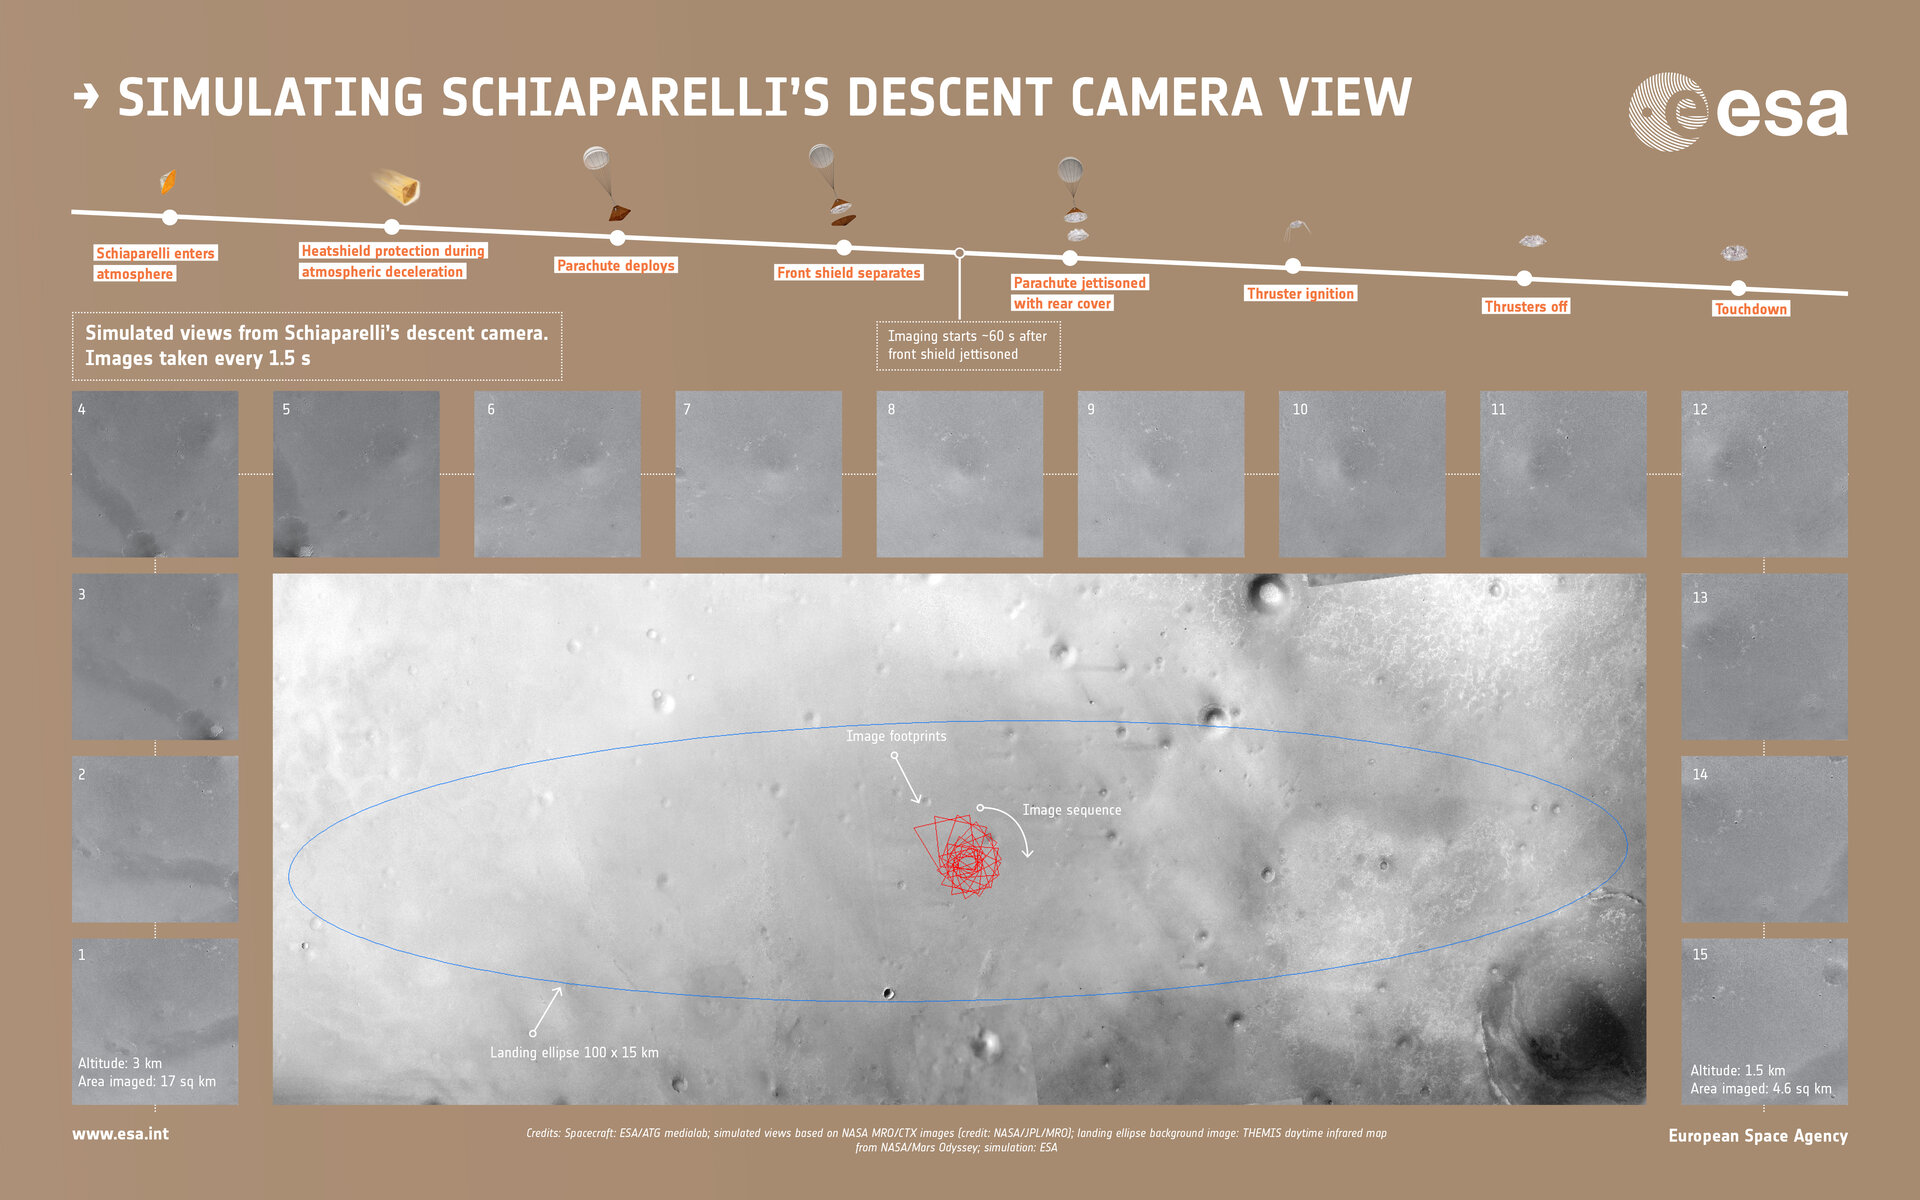 Simulated view of Schiaparelli’s descent images